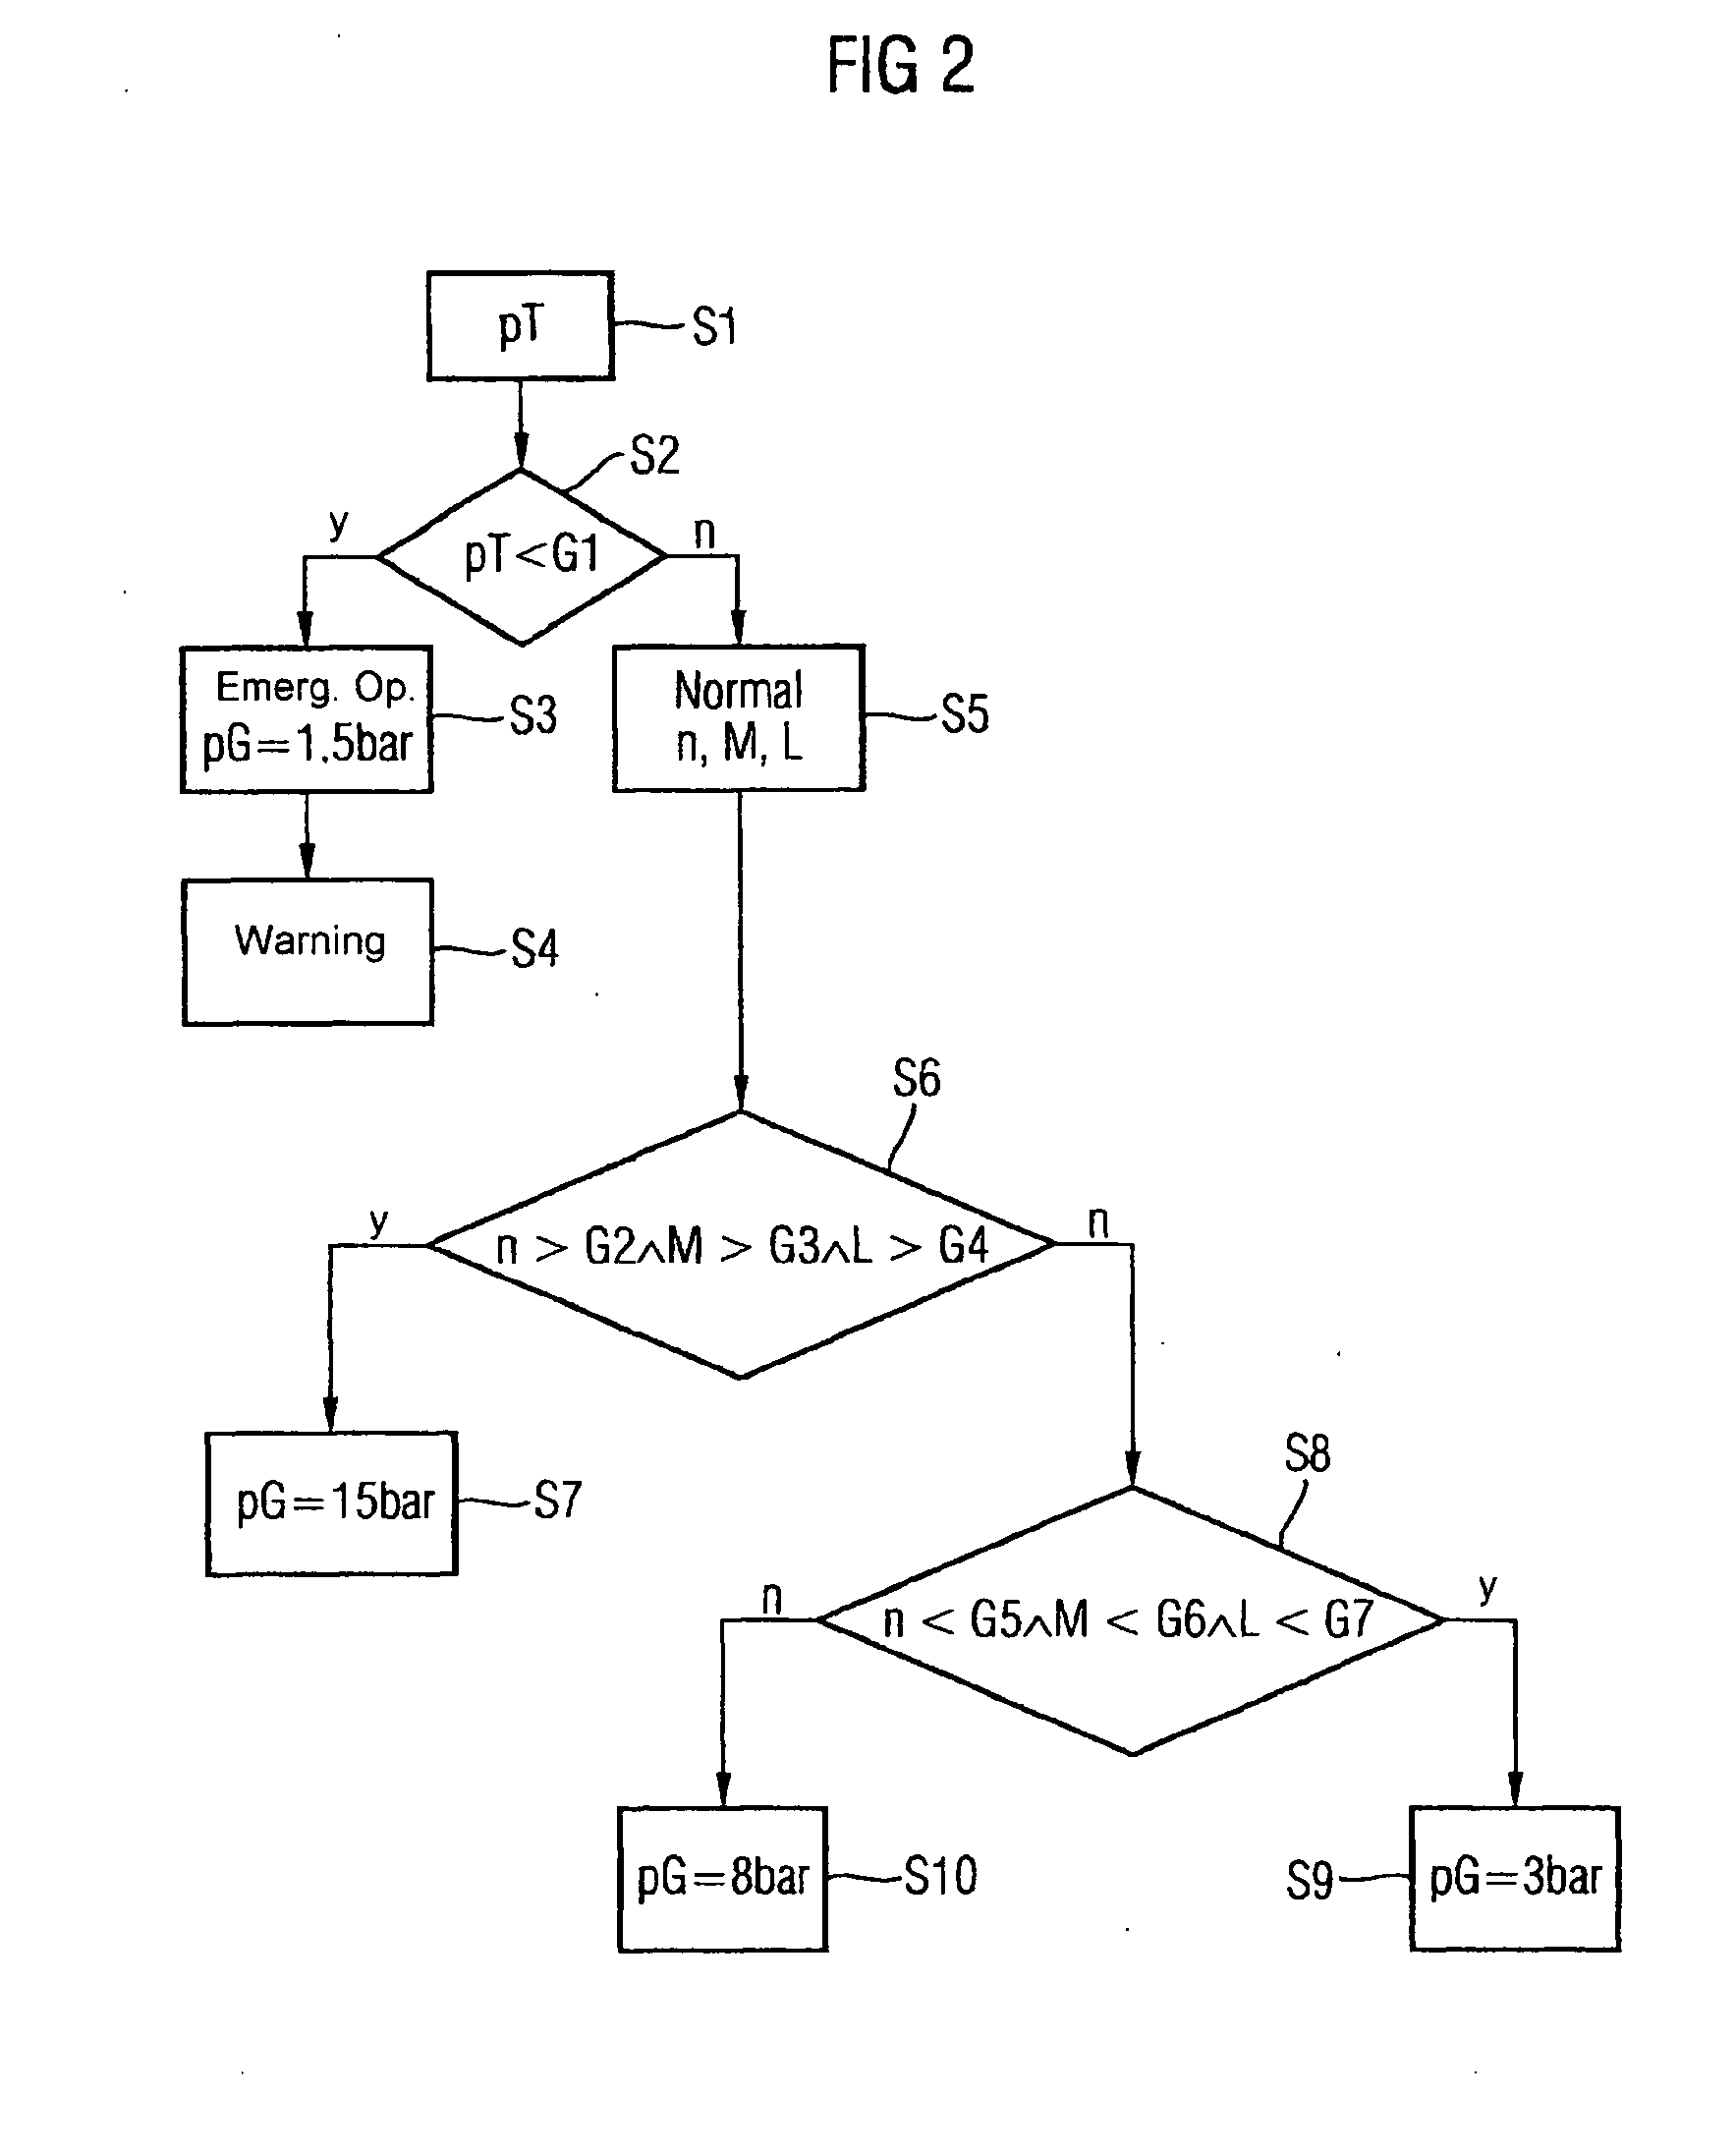 Operating Method and Device for a Gas-Operated Internal Combustion Engine